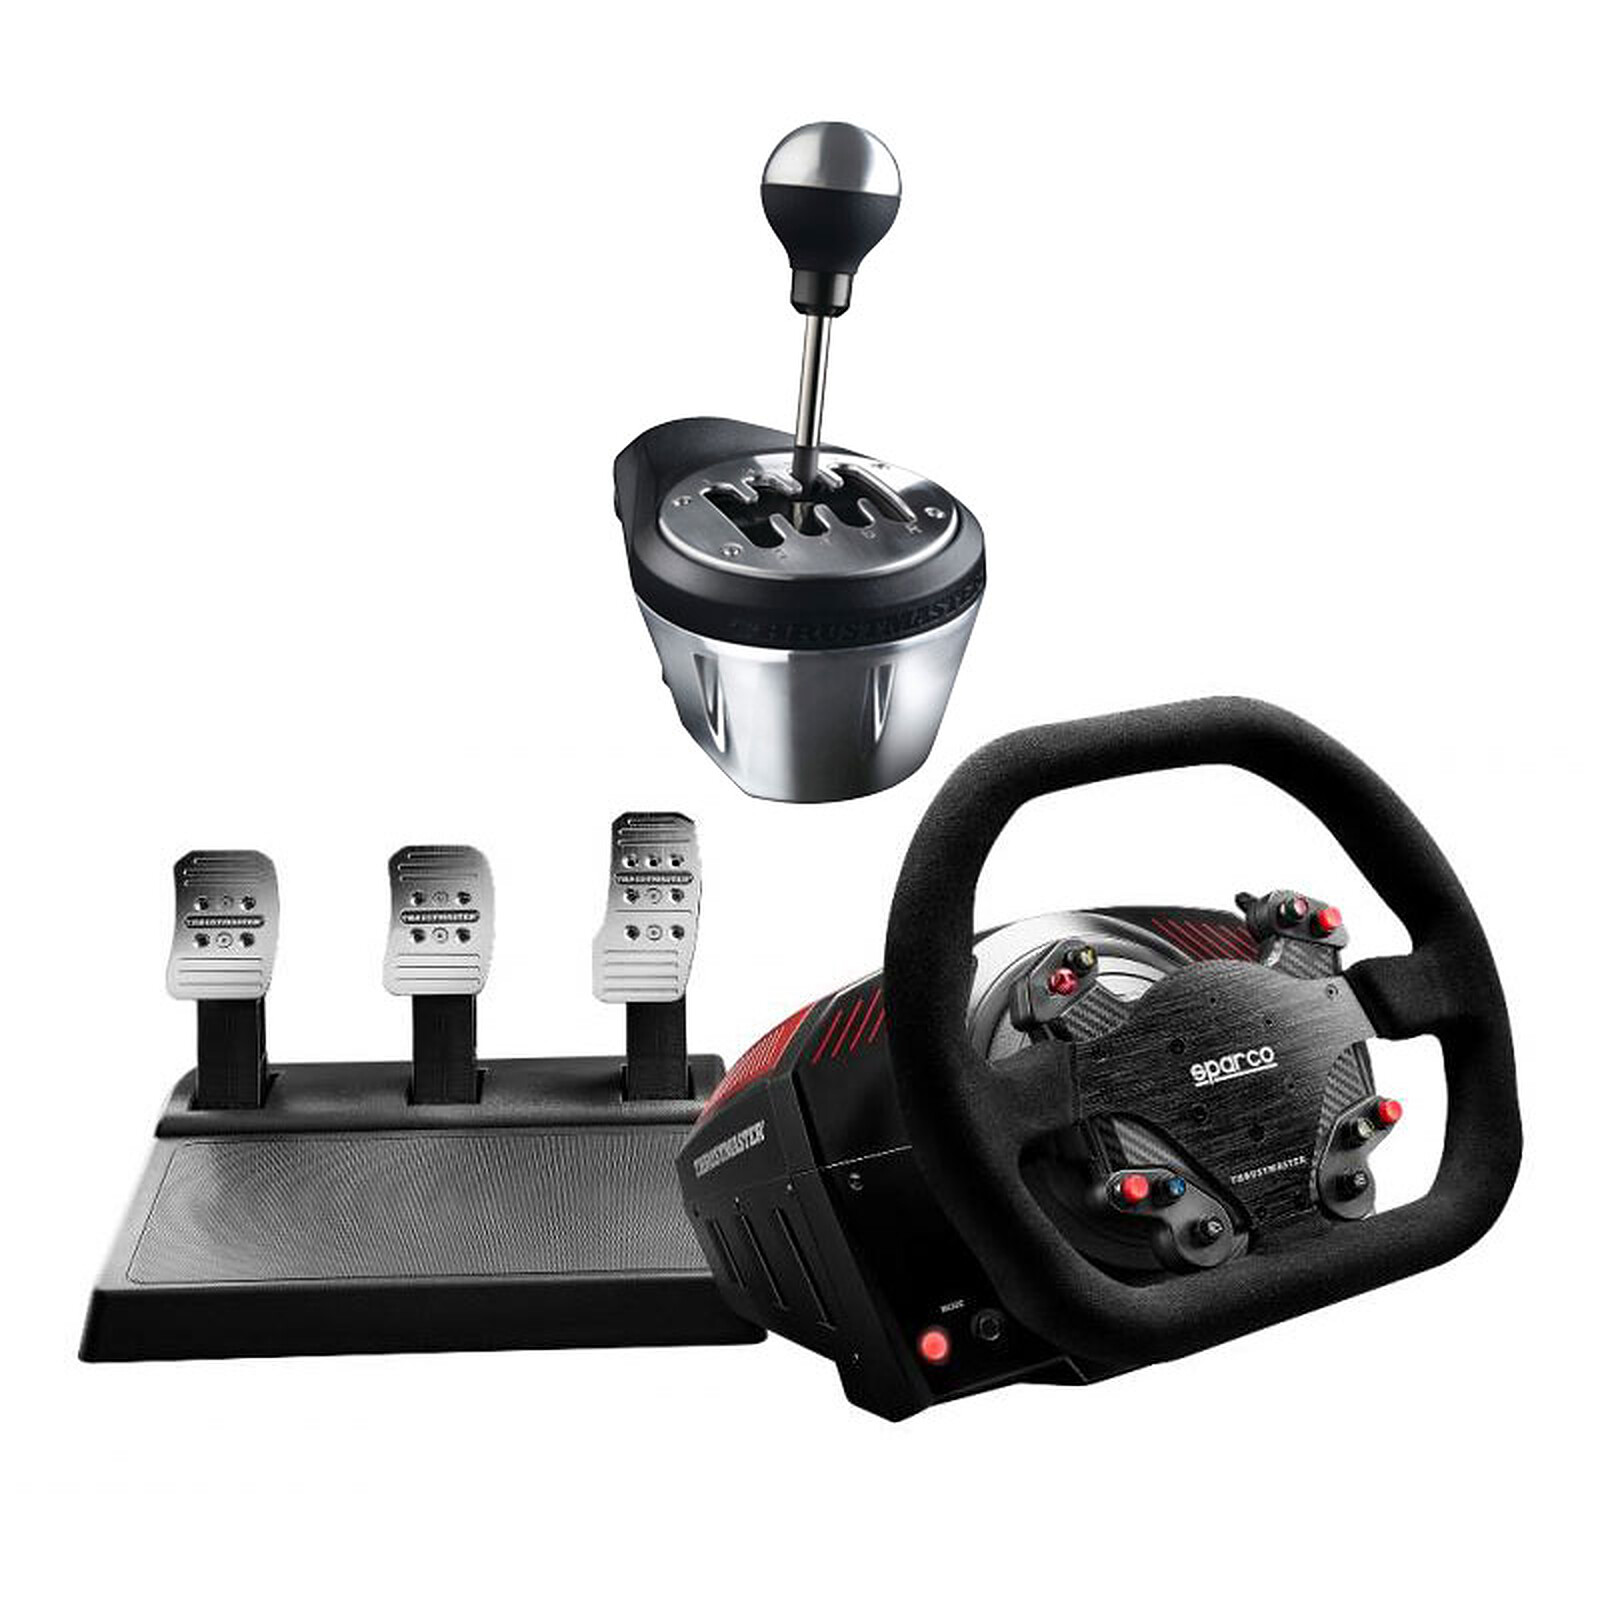 Thrustmaster TS-XW Racer Sparco + TH8 Add-On Shifter OFFERT ! - Volant PC -  Garantie 3 ans LDLC